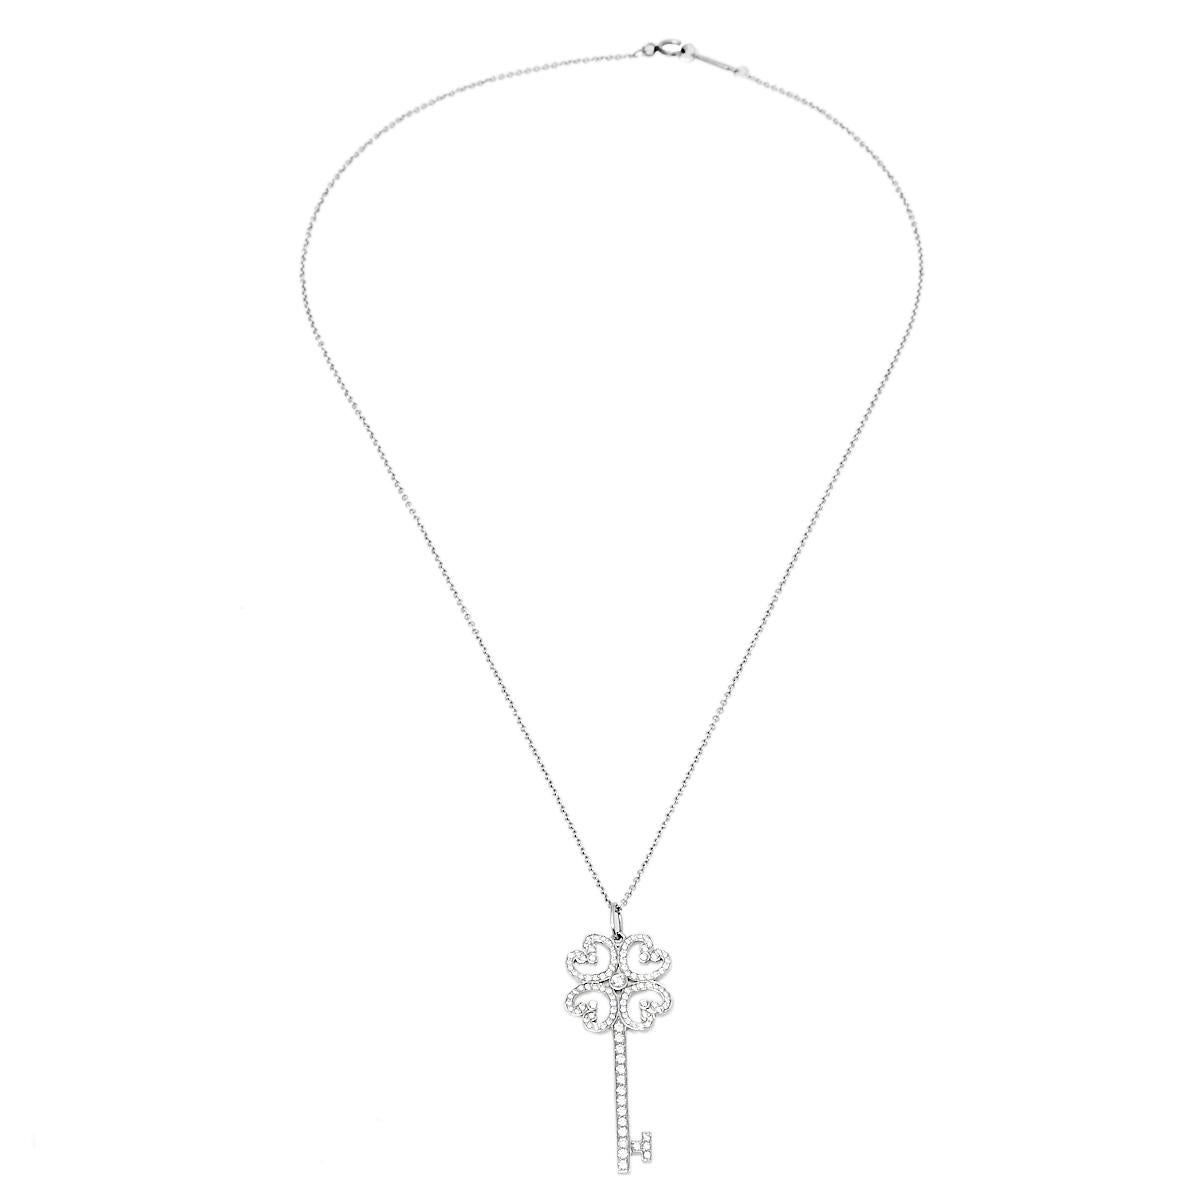 One look at this beauty from Tiffany & Co. and you'll know why diamonds are a girl's best friend. Tiffany and Co. carry the reputation of excellent craftsmanship and exquisite creativity when it comes to jewelry, and this gorgeous pendant necklace